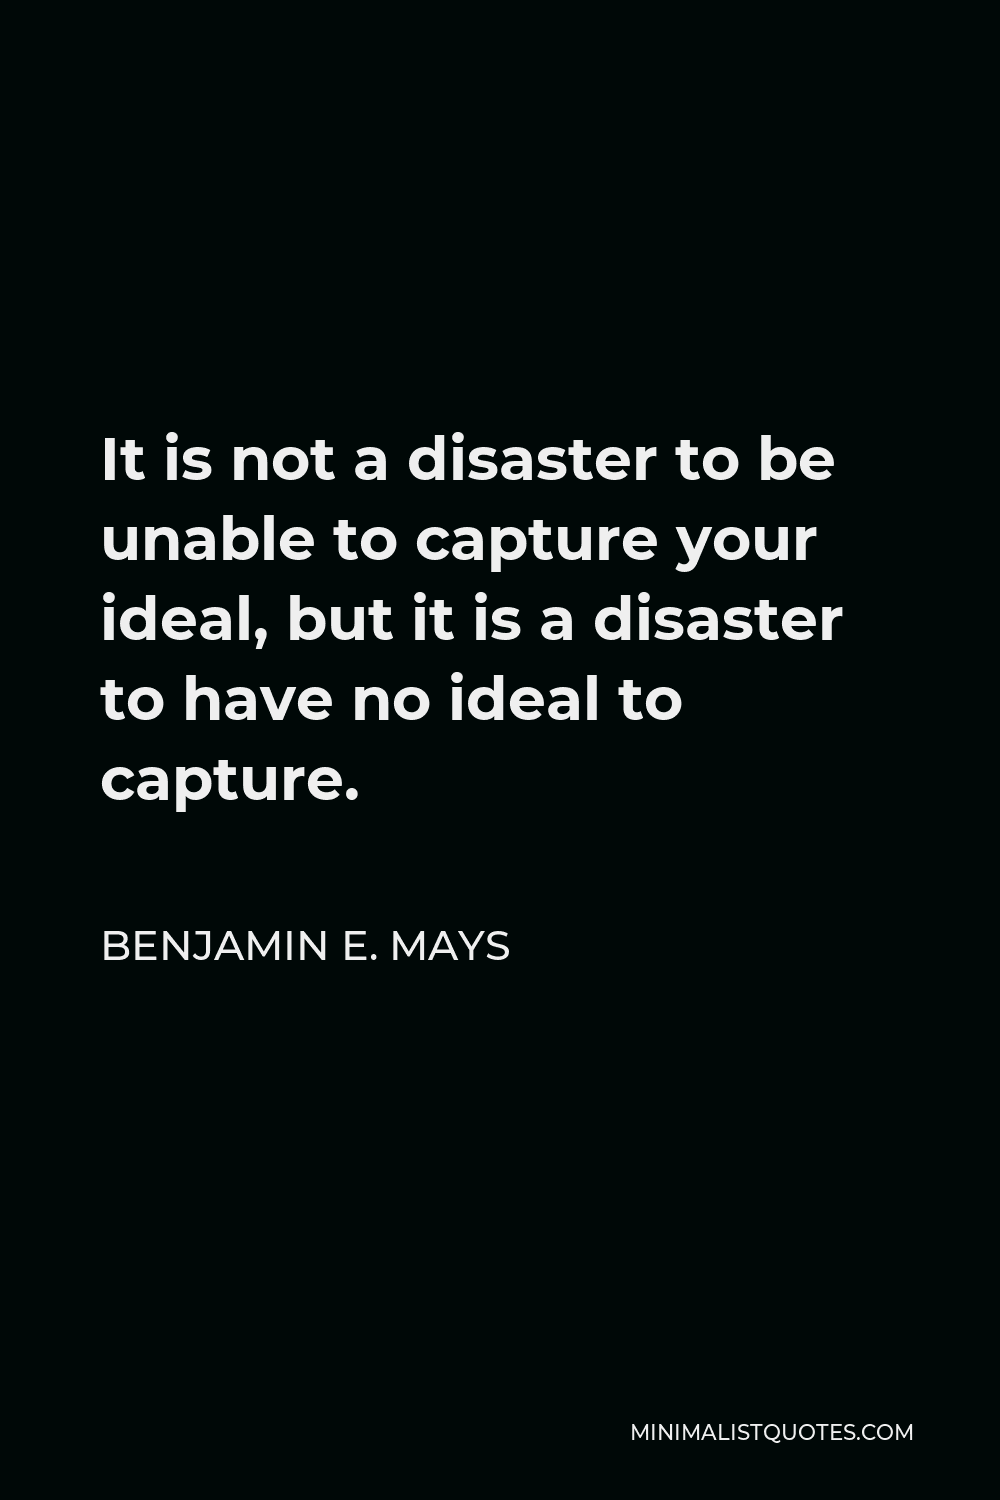 Benjamin E. Mays Quote - It is not a disaster to be unable to capture your ideal, but it is a disaster to have no ideal to capture.